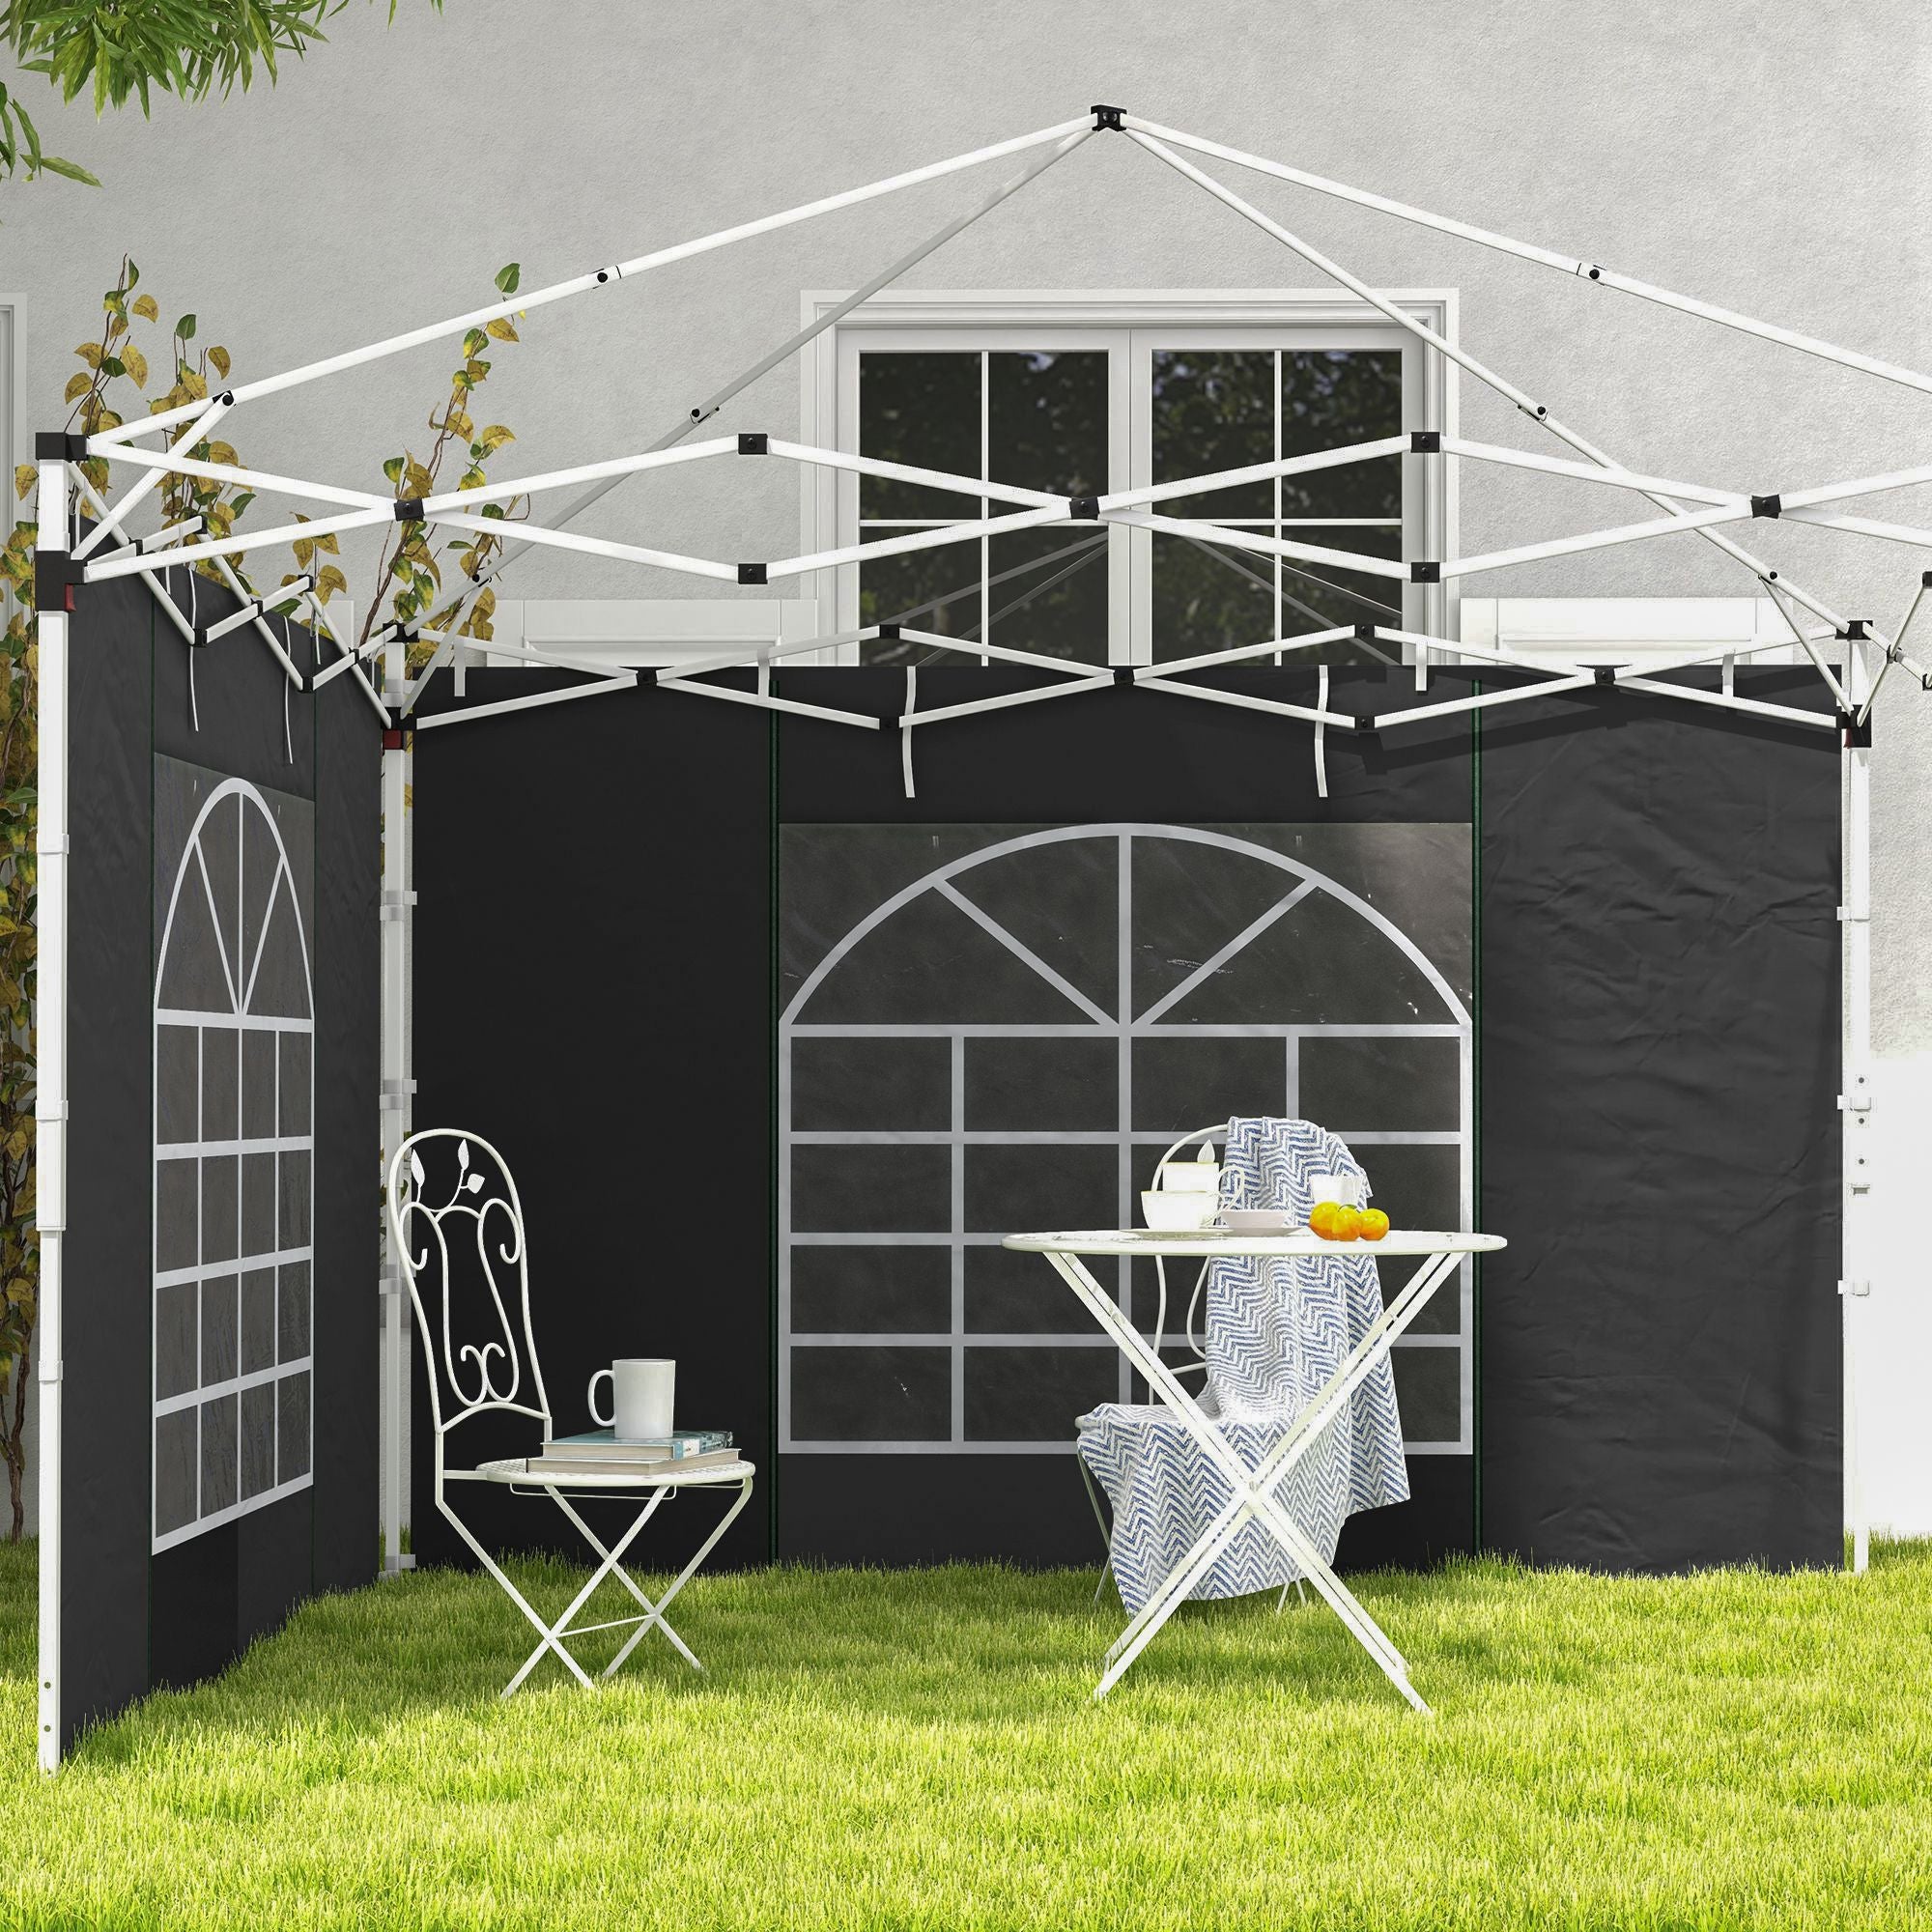 Outsunny Gazebo Side Panels, 2 Pack Sides Replacement, for 3x3(m) or 3x6m Pop Up Gazebo, with Windows and Doors, Black